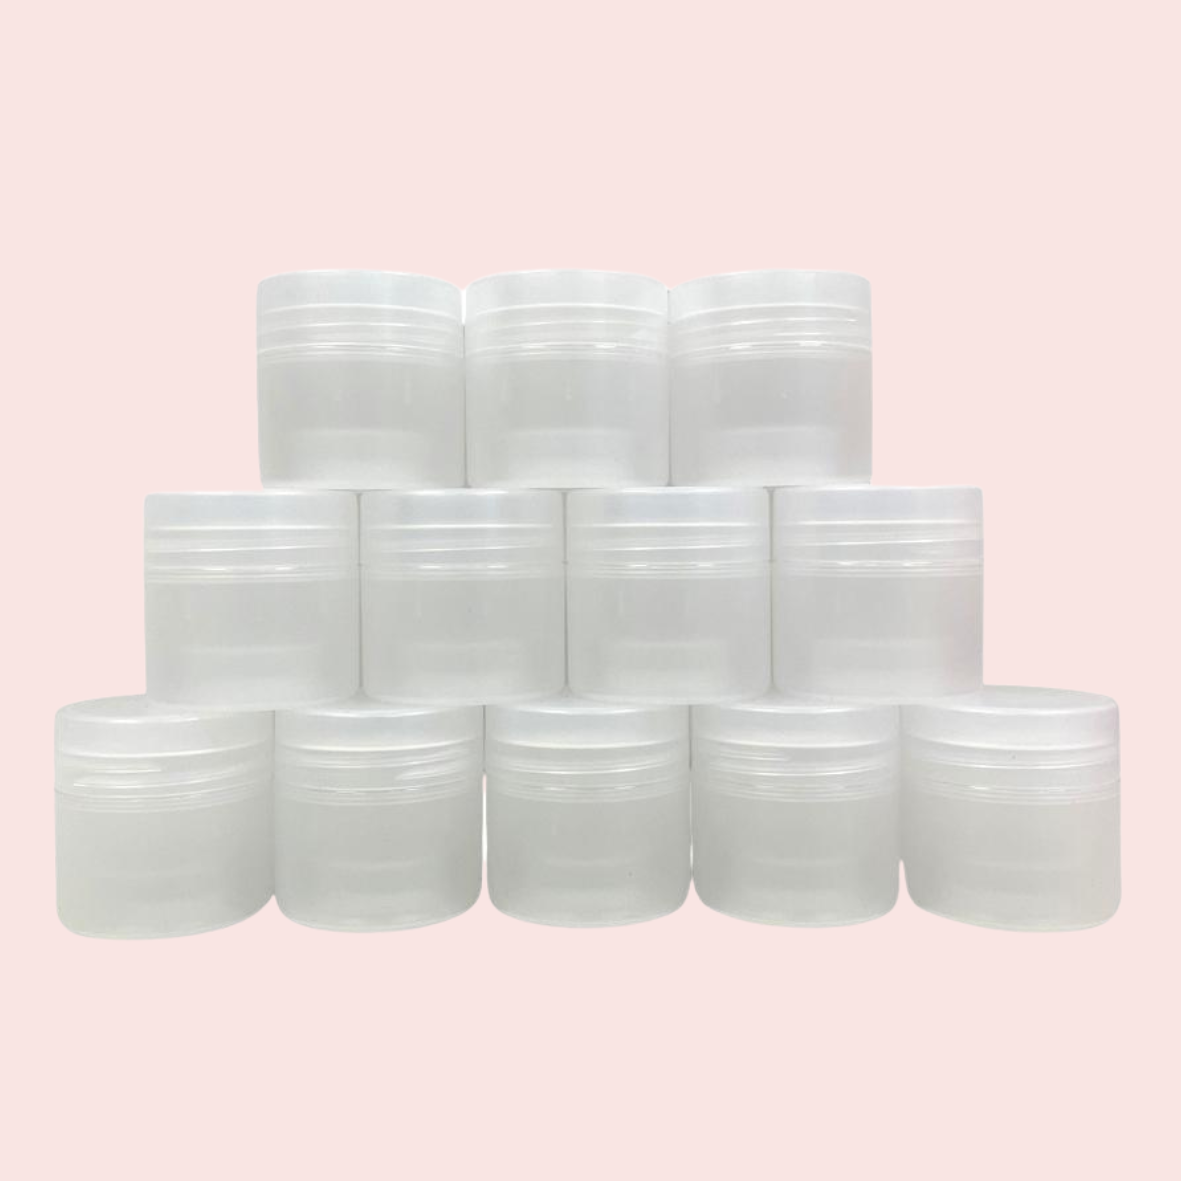 Frosted body butter jars